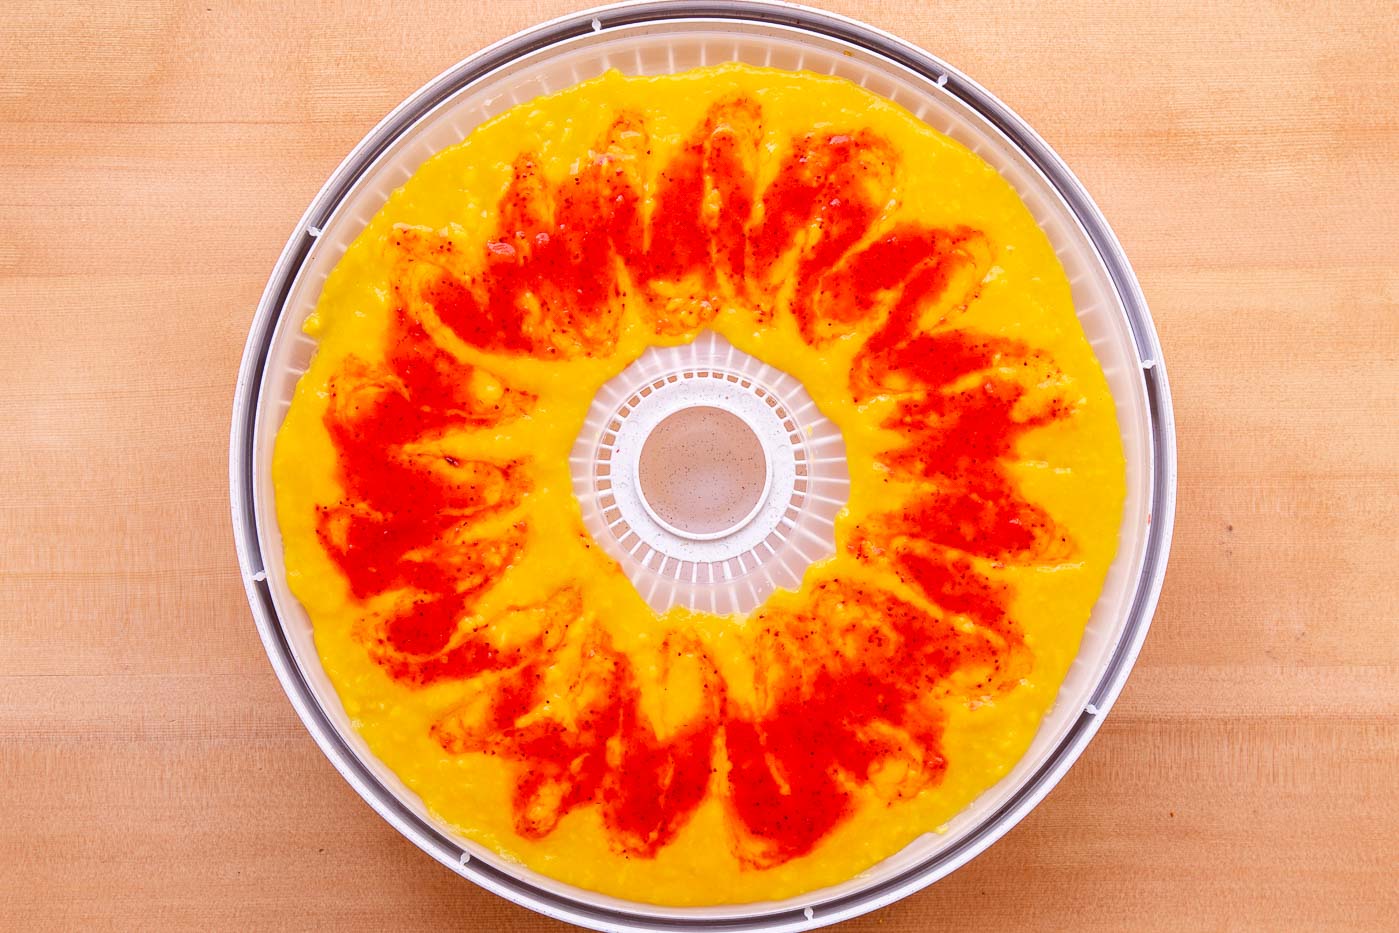 Dehydrator tray loaded with fruit puree